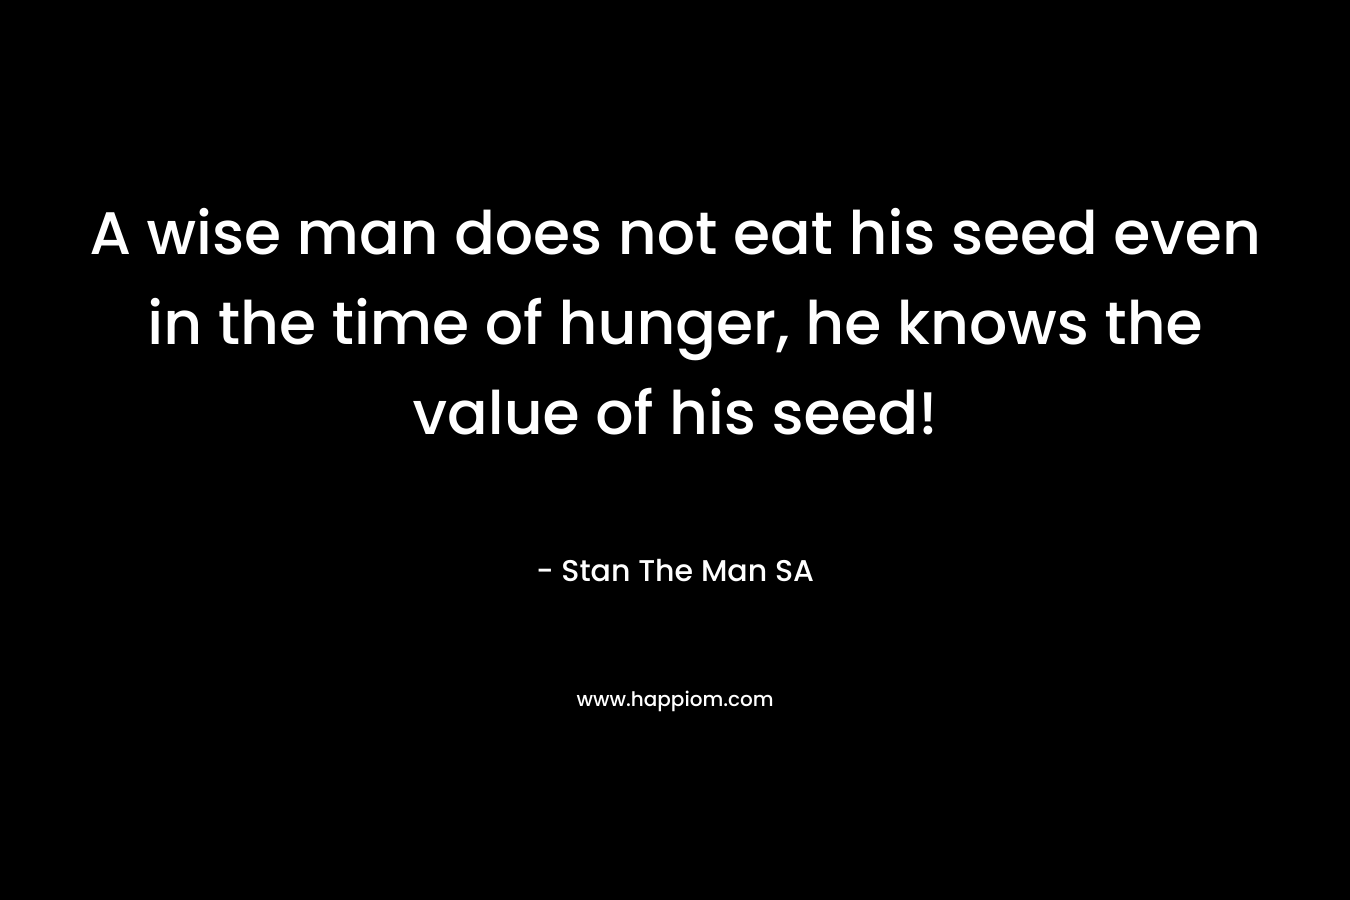 A wise man does not eat his seed even in the time of hunger, he knows the value of his seed!